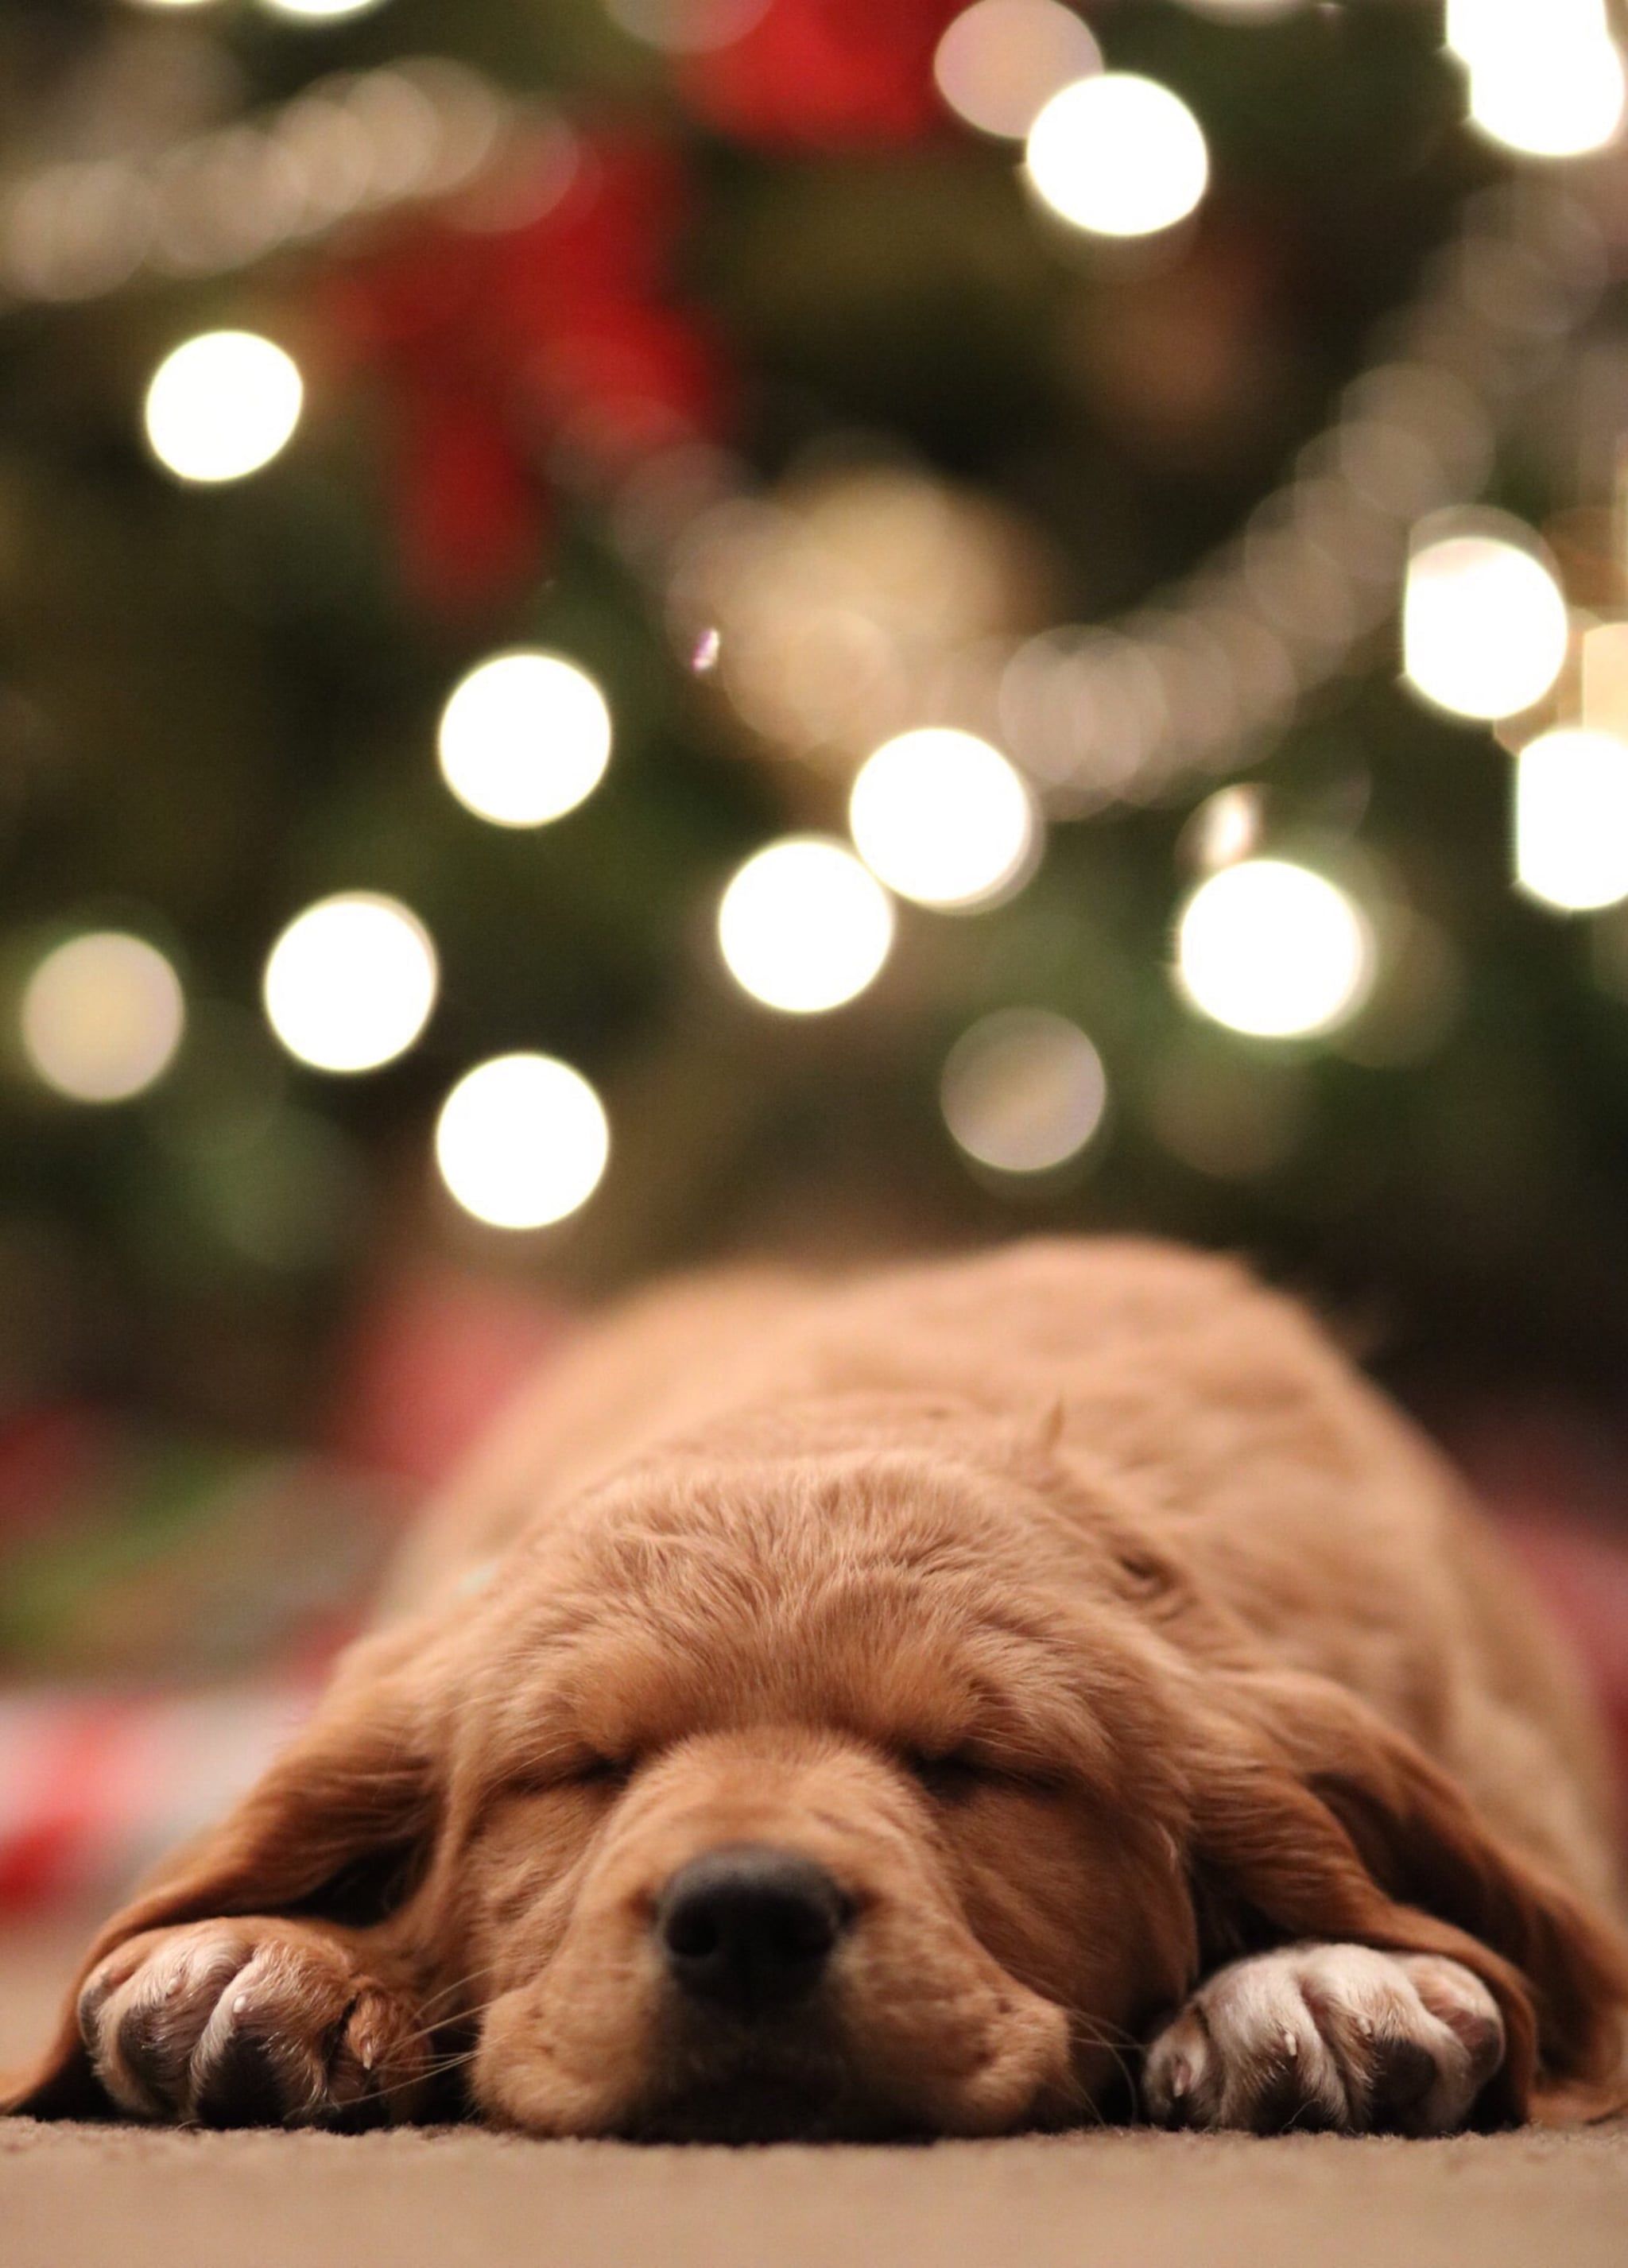 Christmas Puppy iPhone Wallpaper Christmas Wallpaper That'll Make Your Home Screen Aesthetically Pleasing This Holiday. POPSUGAR Technology UK Photo 29